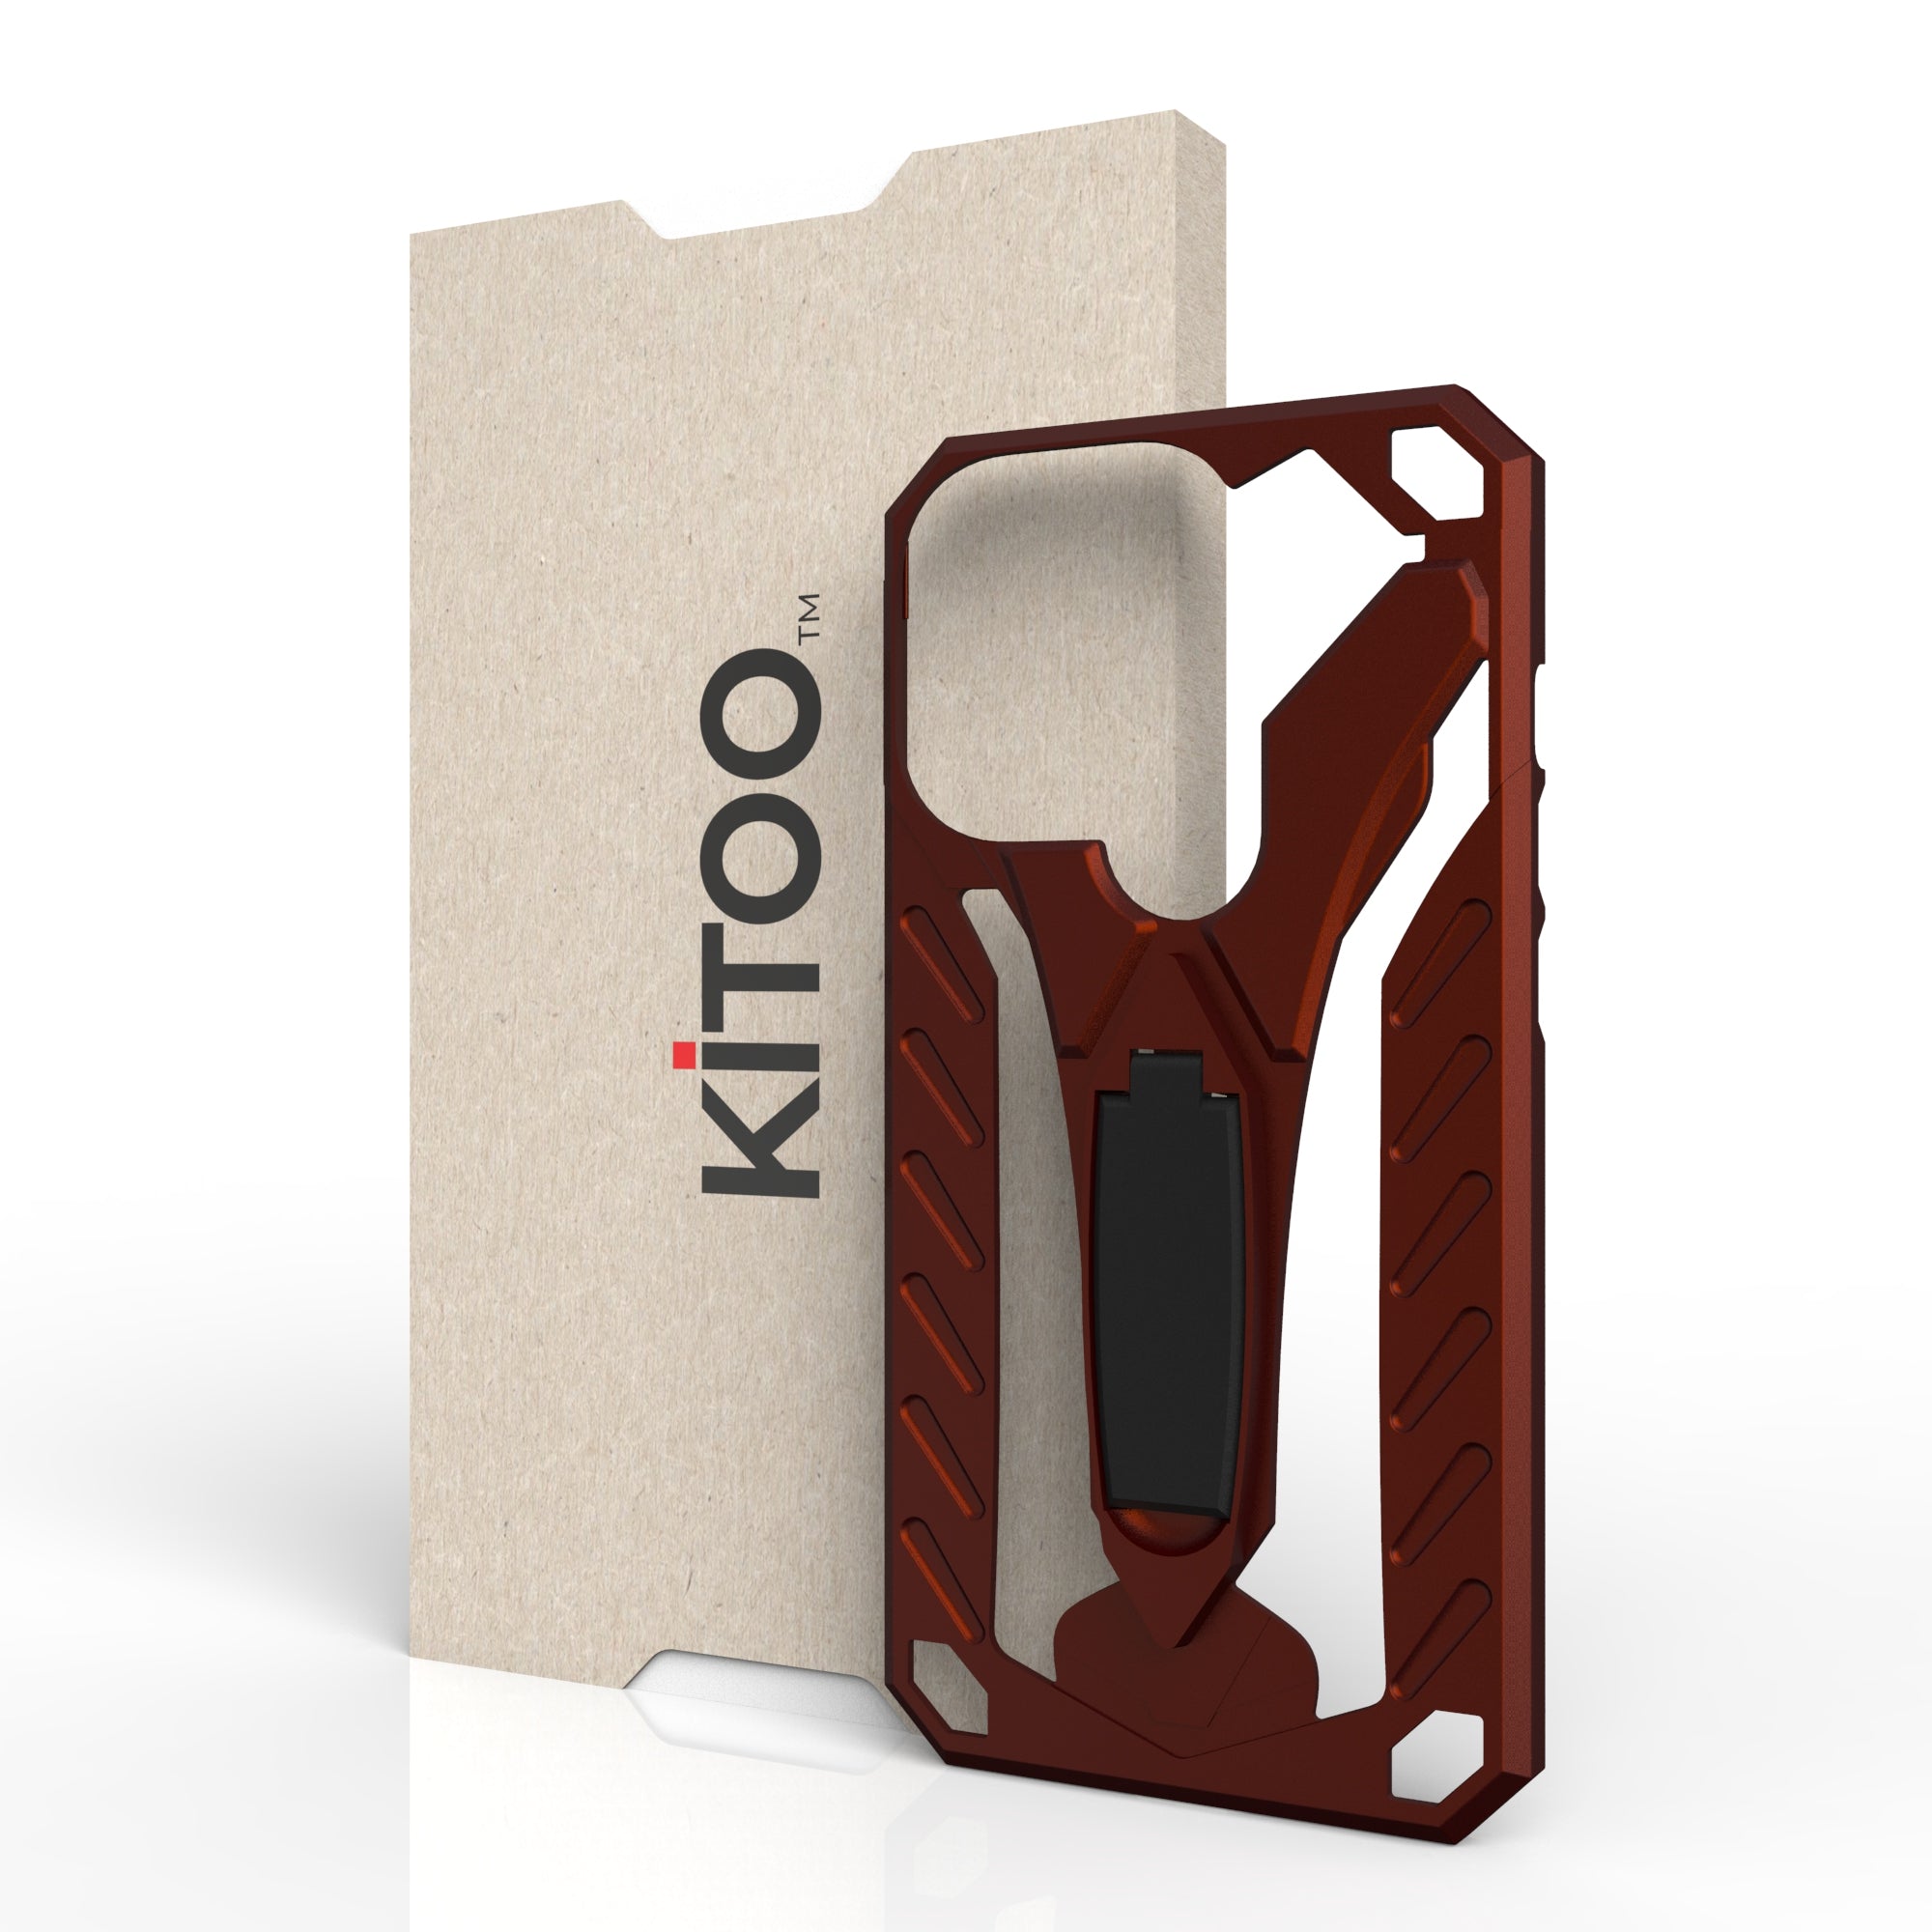 Kitoo Kickstand Panel Designed for iPhone 13 Pro case (Spare Part only) - Red